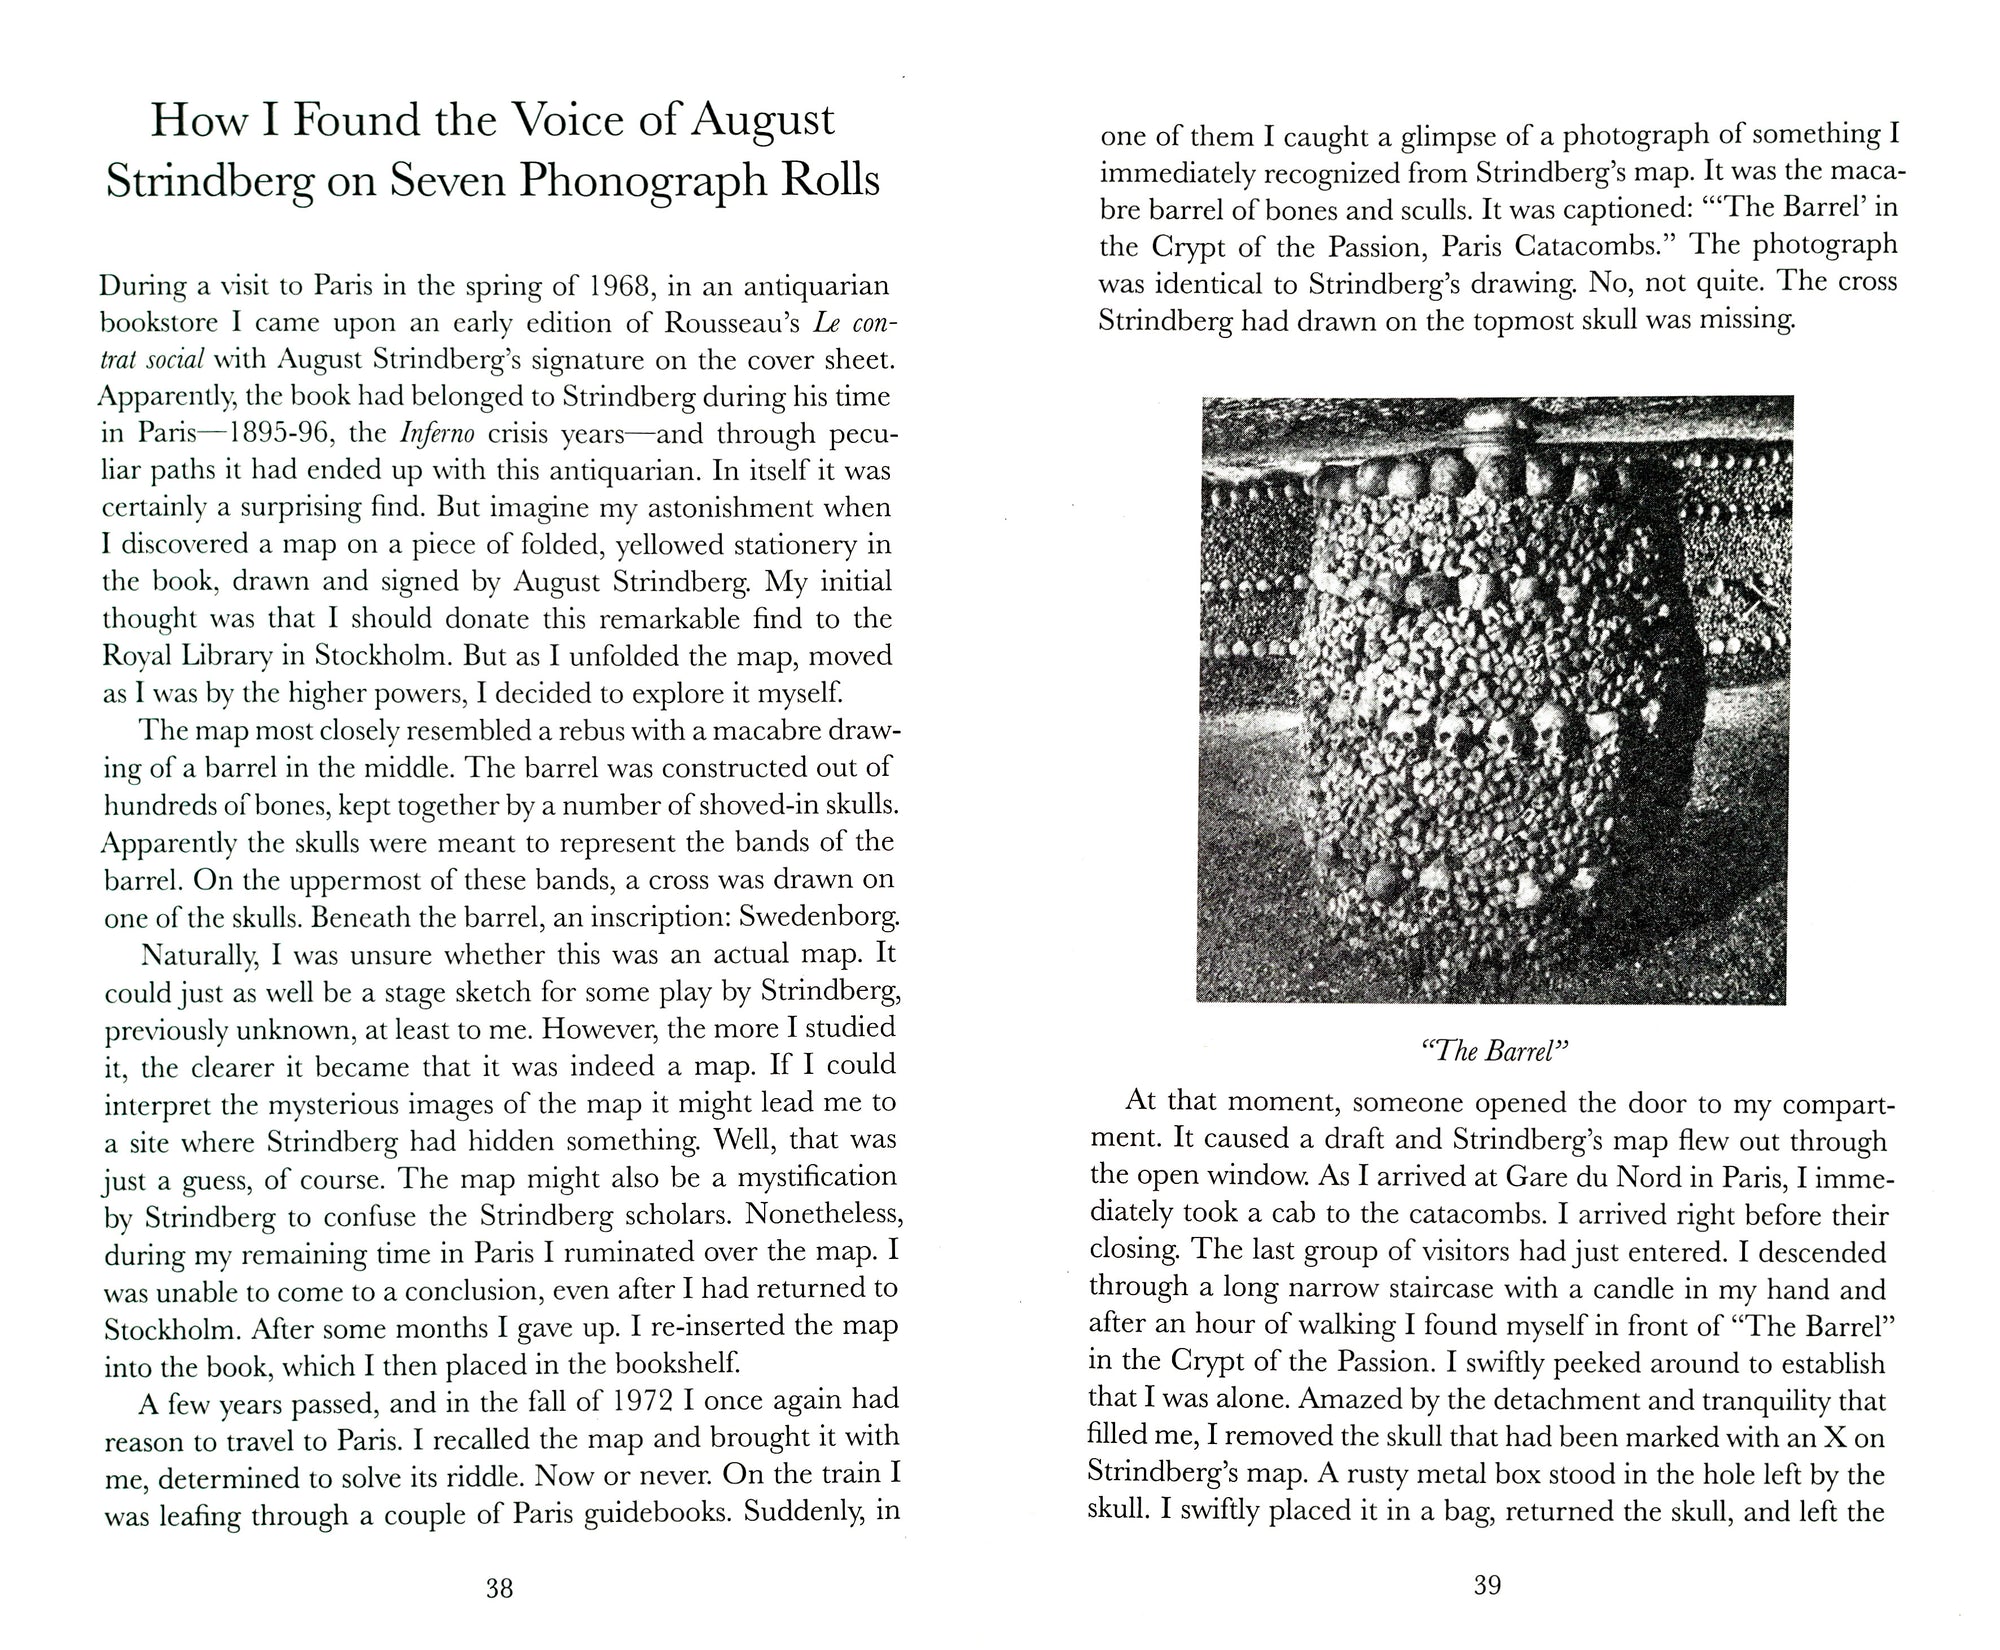 Book spread with white background, and column of text in black serif writing on the left page with the title How I Found the Voice of August Strindberg on Seven Phonograph Rolls above. The right page contains a column of text in black serif writing interrupted by a black and white photography of a barrel completely covered in human skulls in varying sizes. Underneath the picture it says the title “The Barrel“.